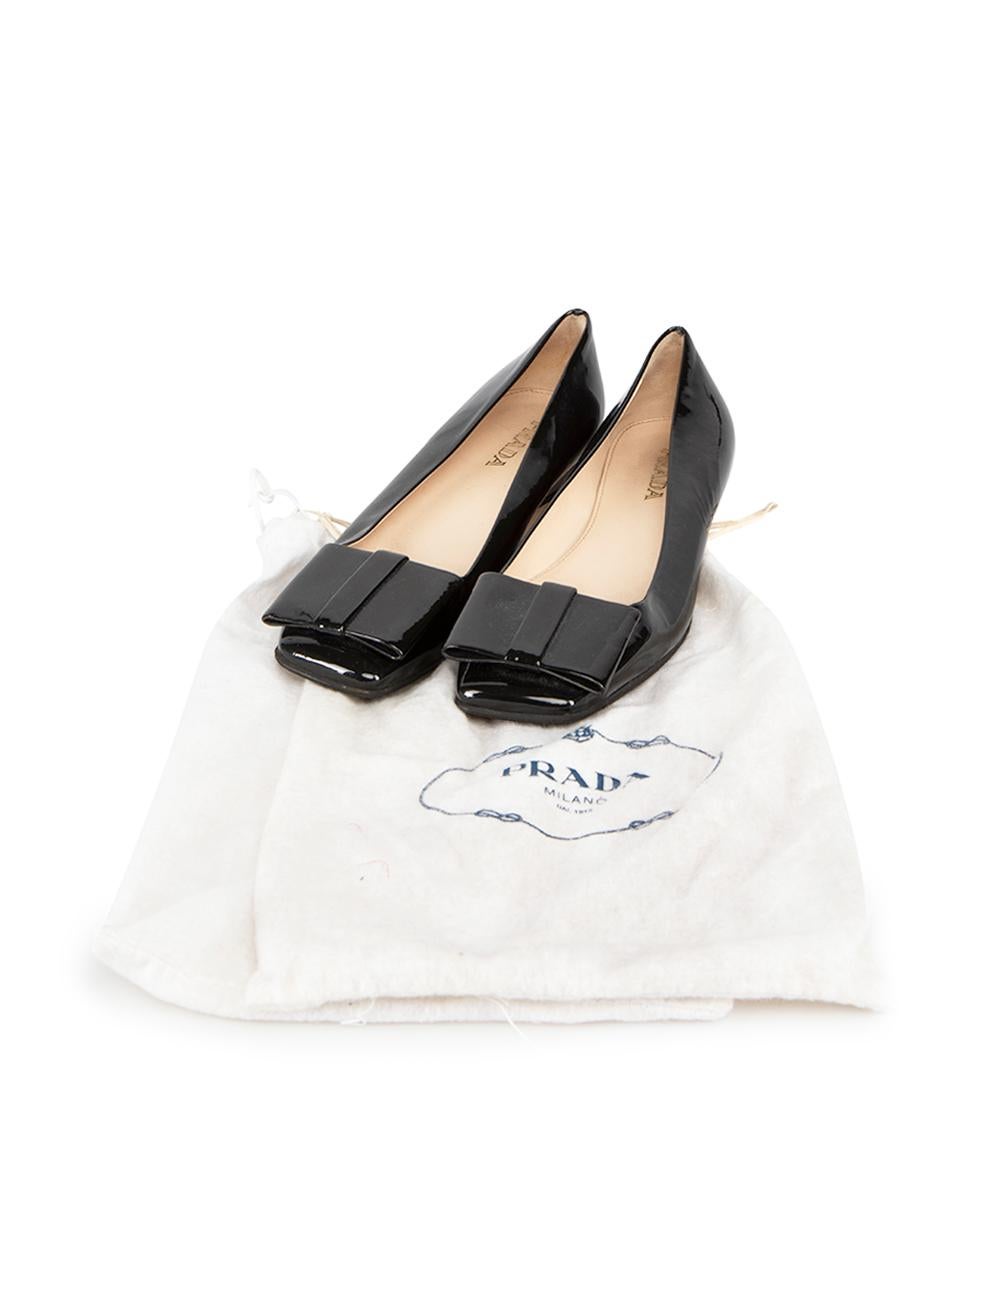 Prada Black Patent Leather Bow Ballet Flats Size IT 36 For Sale 2